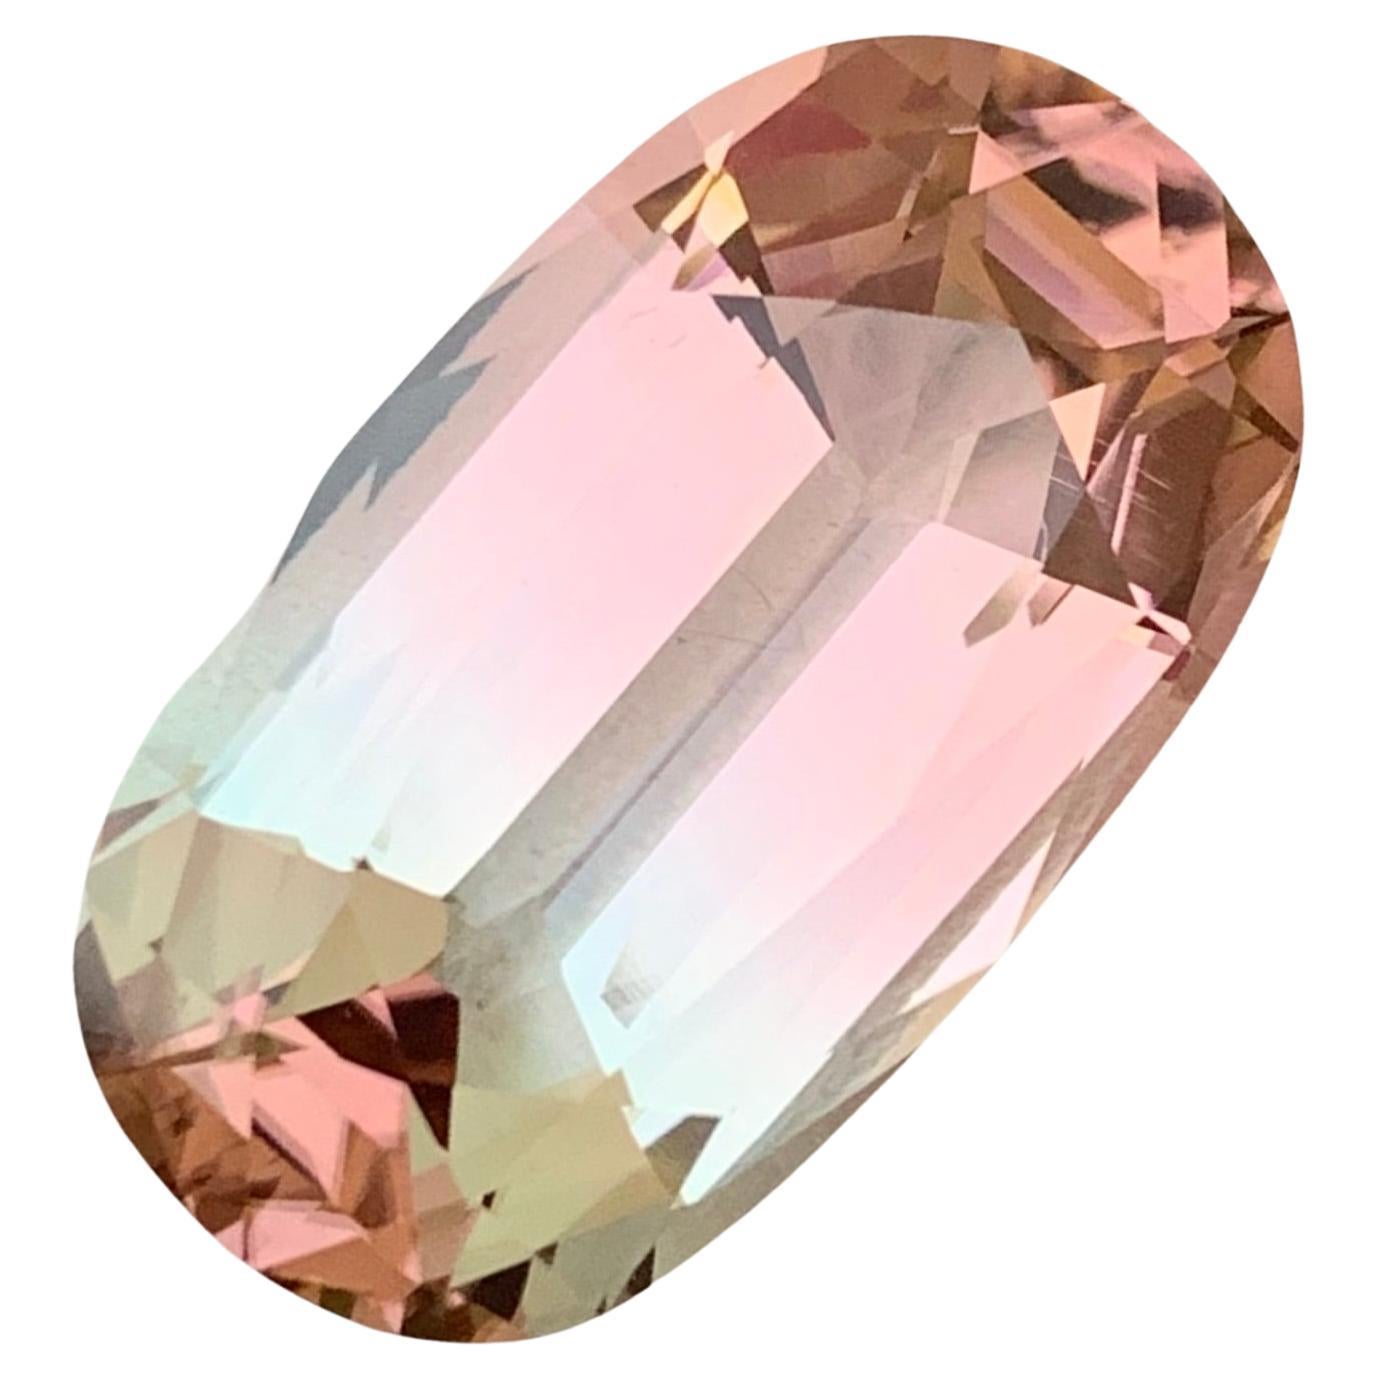 Loose Bicolor Tourmaline 
Weight: 21.60 Carats 
Dimension: 24x13.9x8.9 Mm
Origin: Paprook Afghanistan 
Shape: Oval
Treatment: Non / Natural 
Certificate: On Demand 
Color: Pink & White
Bicolor tourmaline, a captivating gemstone celebrated for its